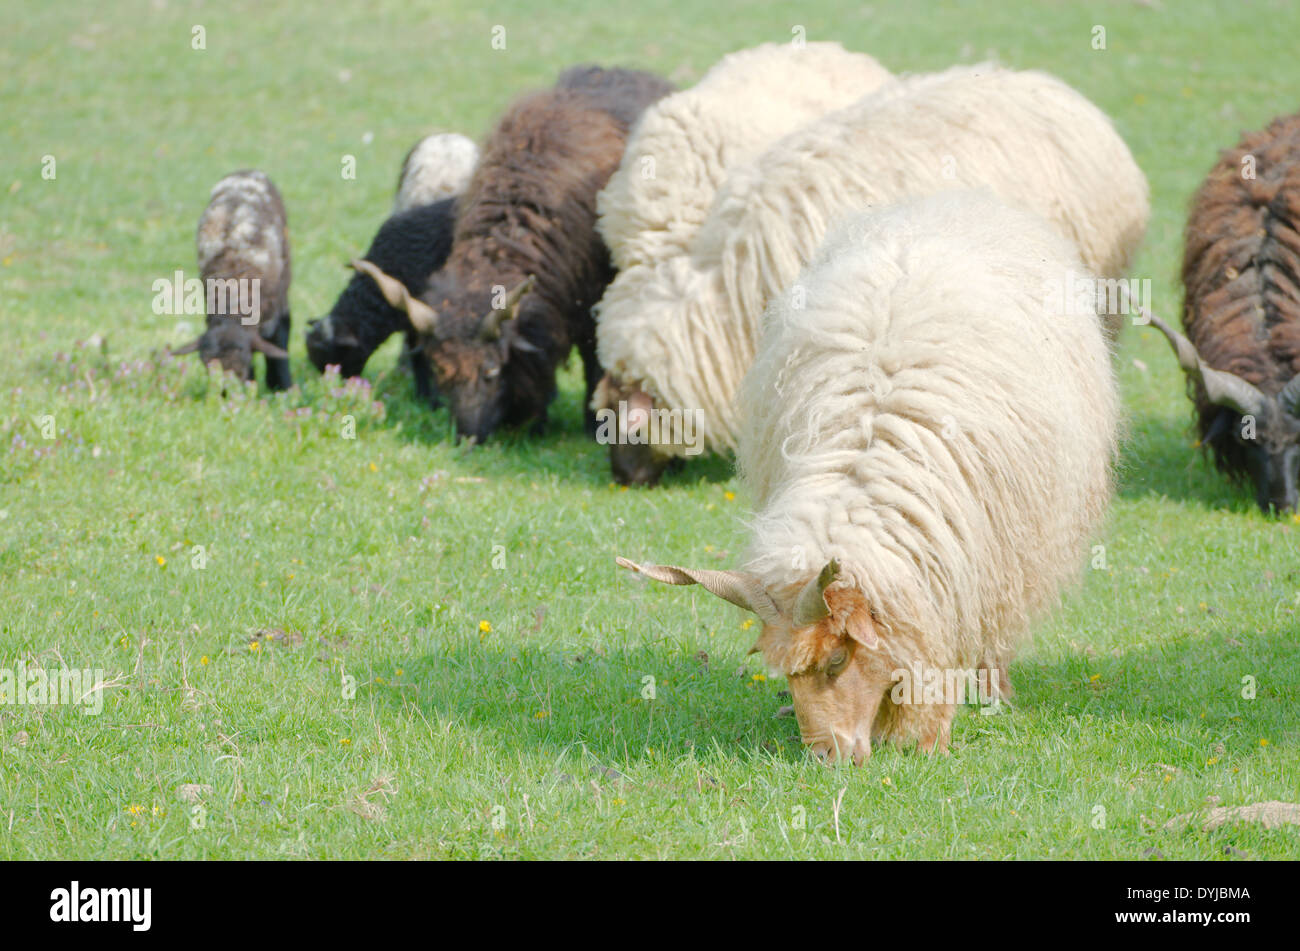 Hungarian Racka Sheep Leading the Grazing in a Green Field Stock Photo